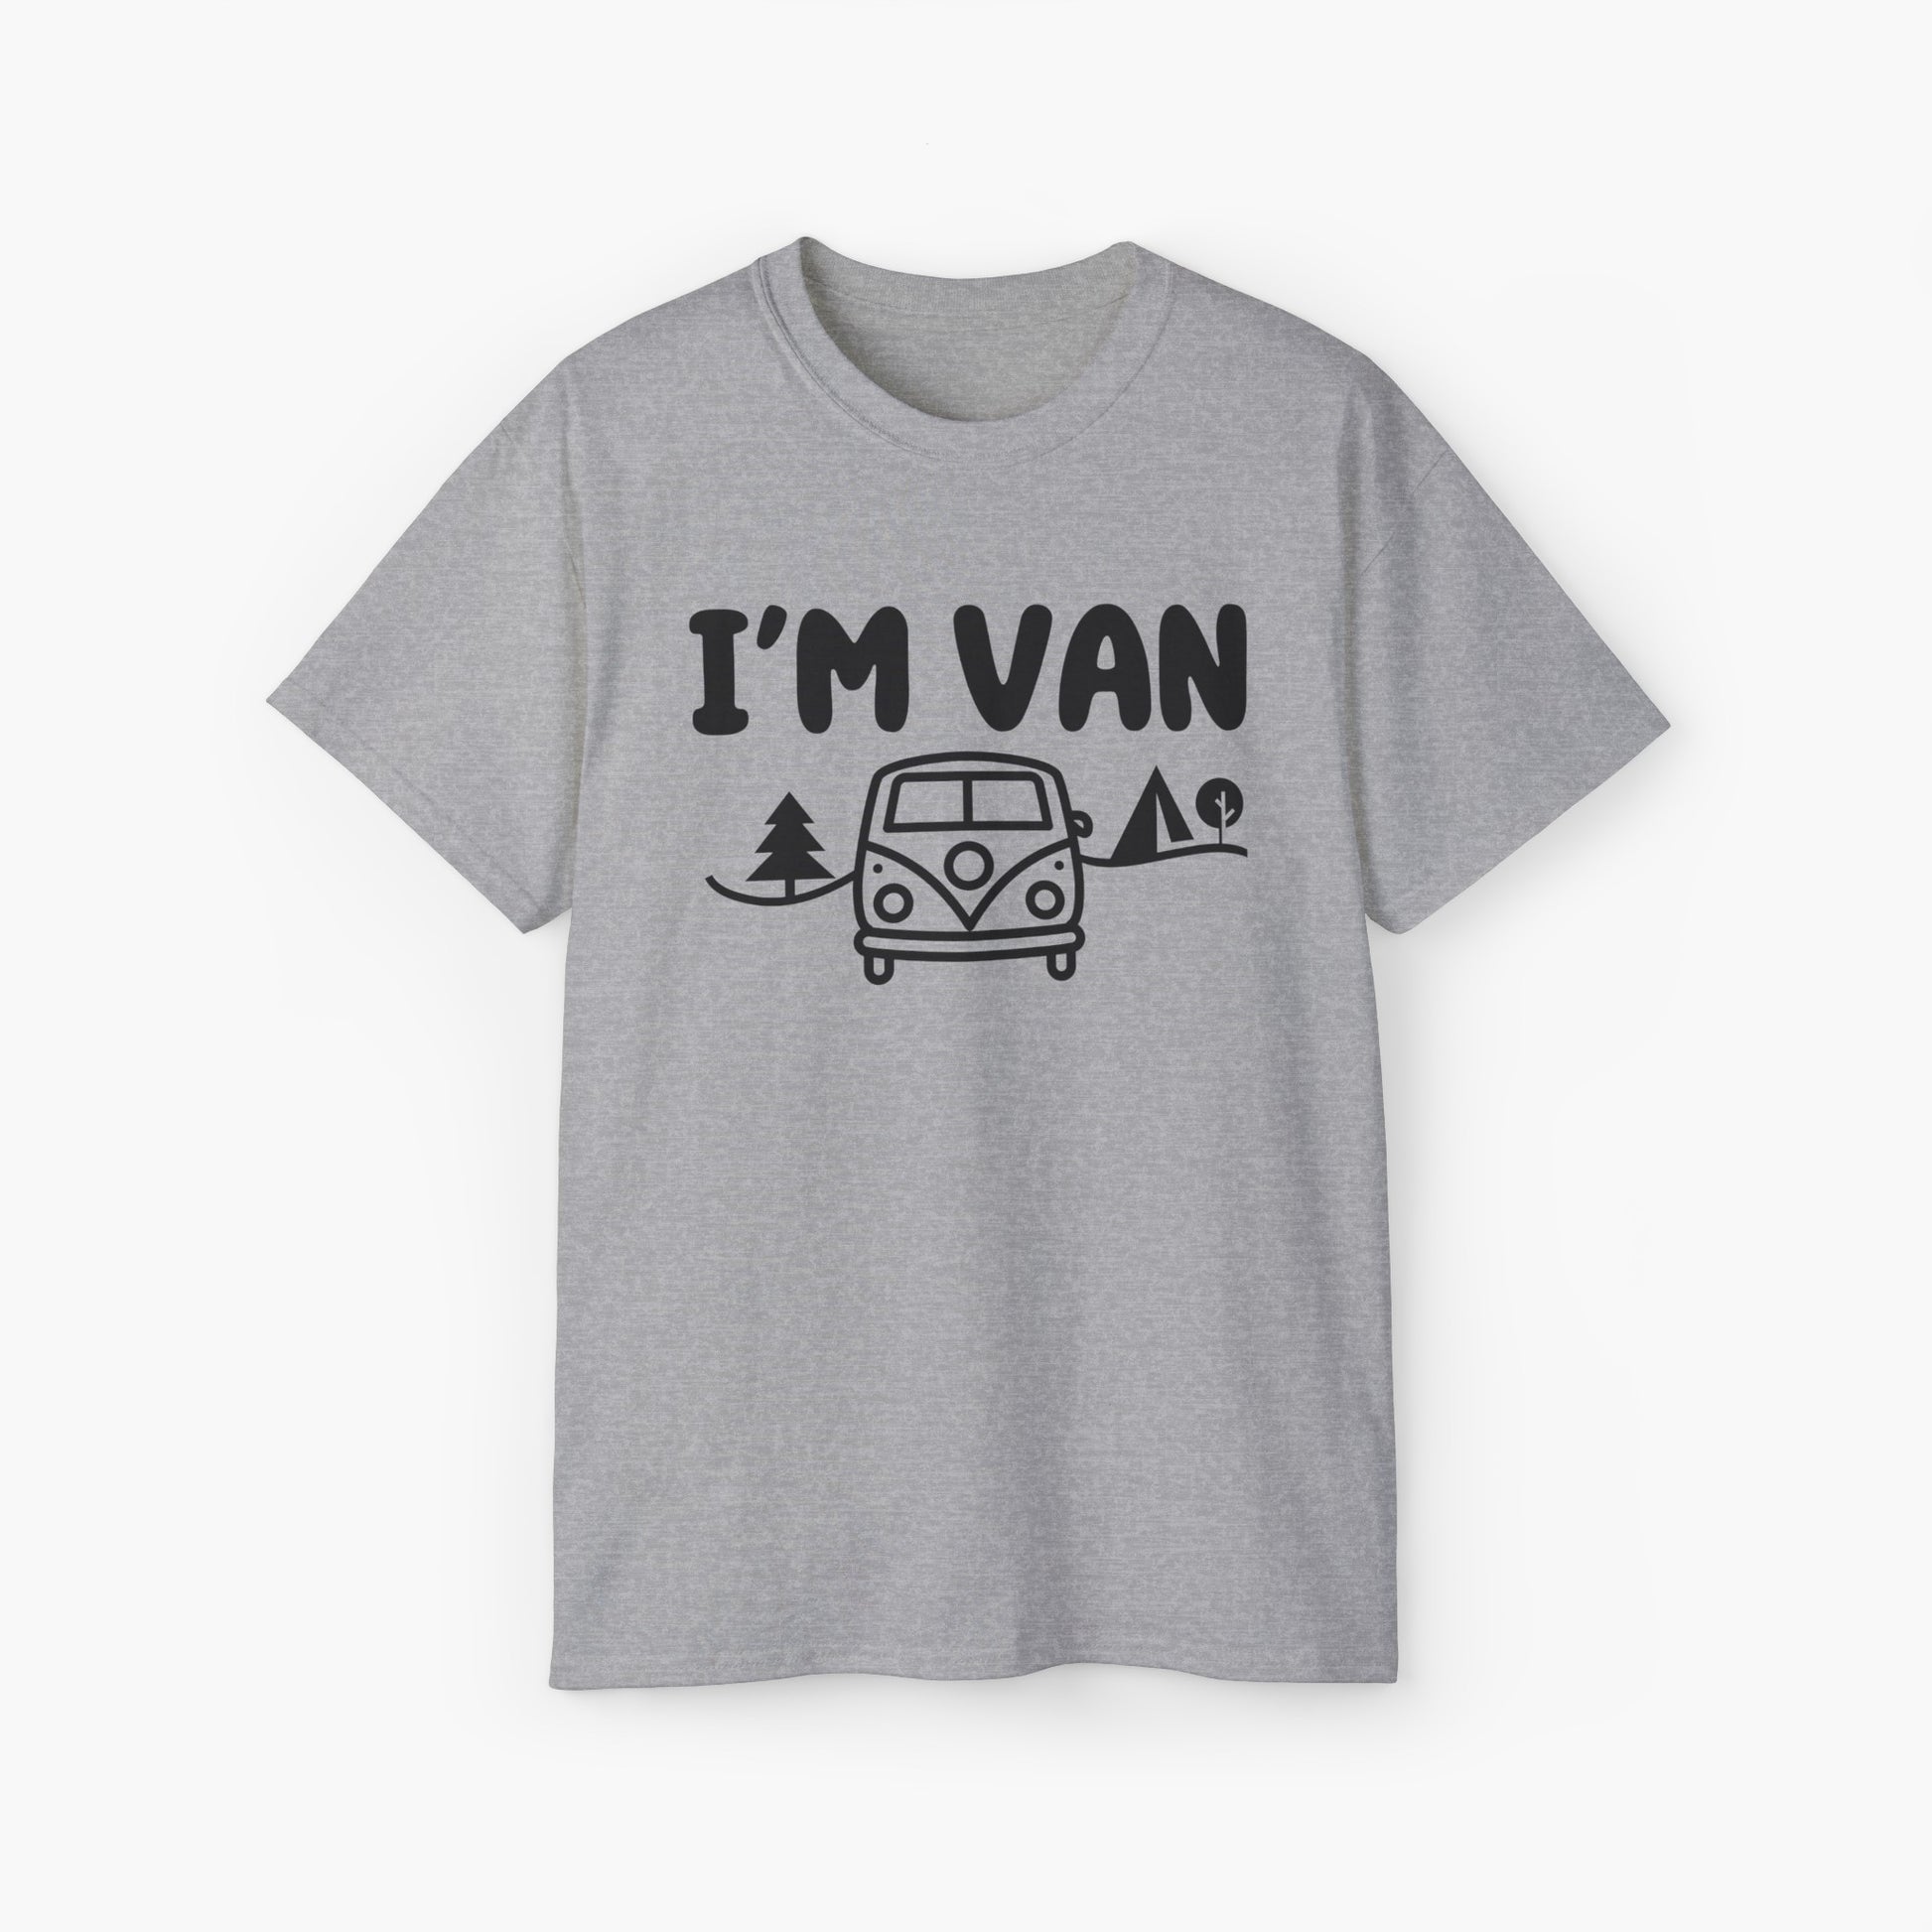 Grey t-shirt with the text 'I'm Van' featuring a graphic of a van surrounded by trees on a plain background.